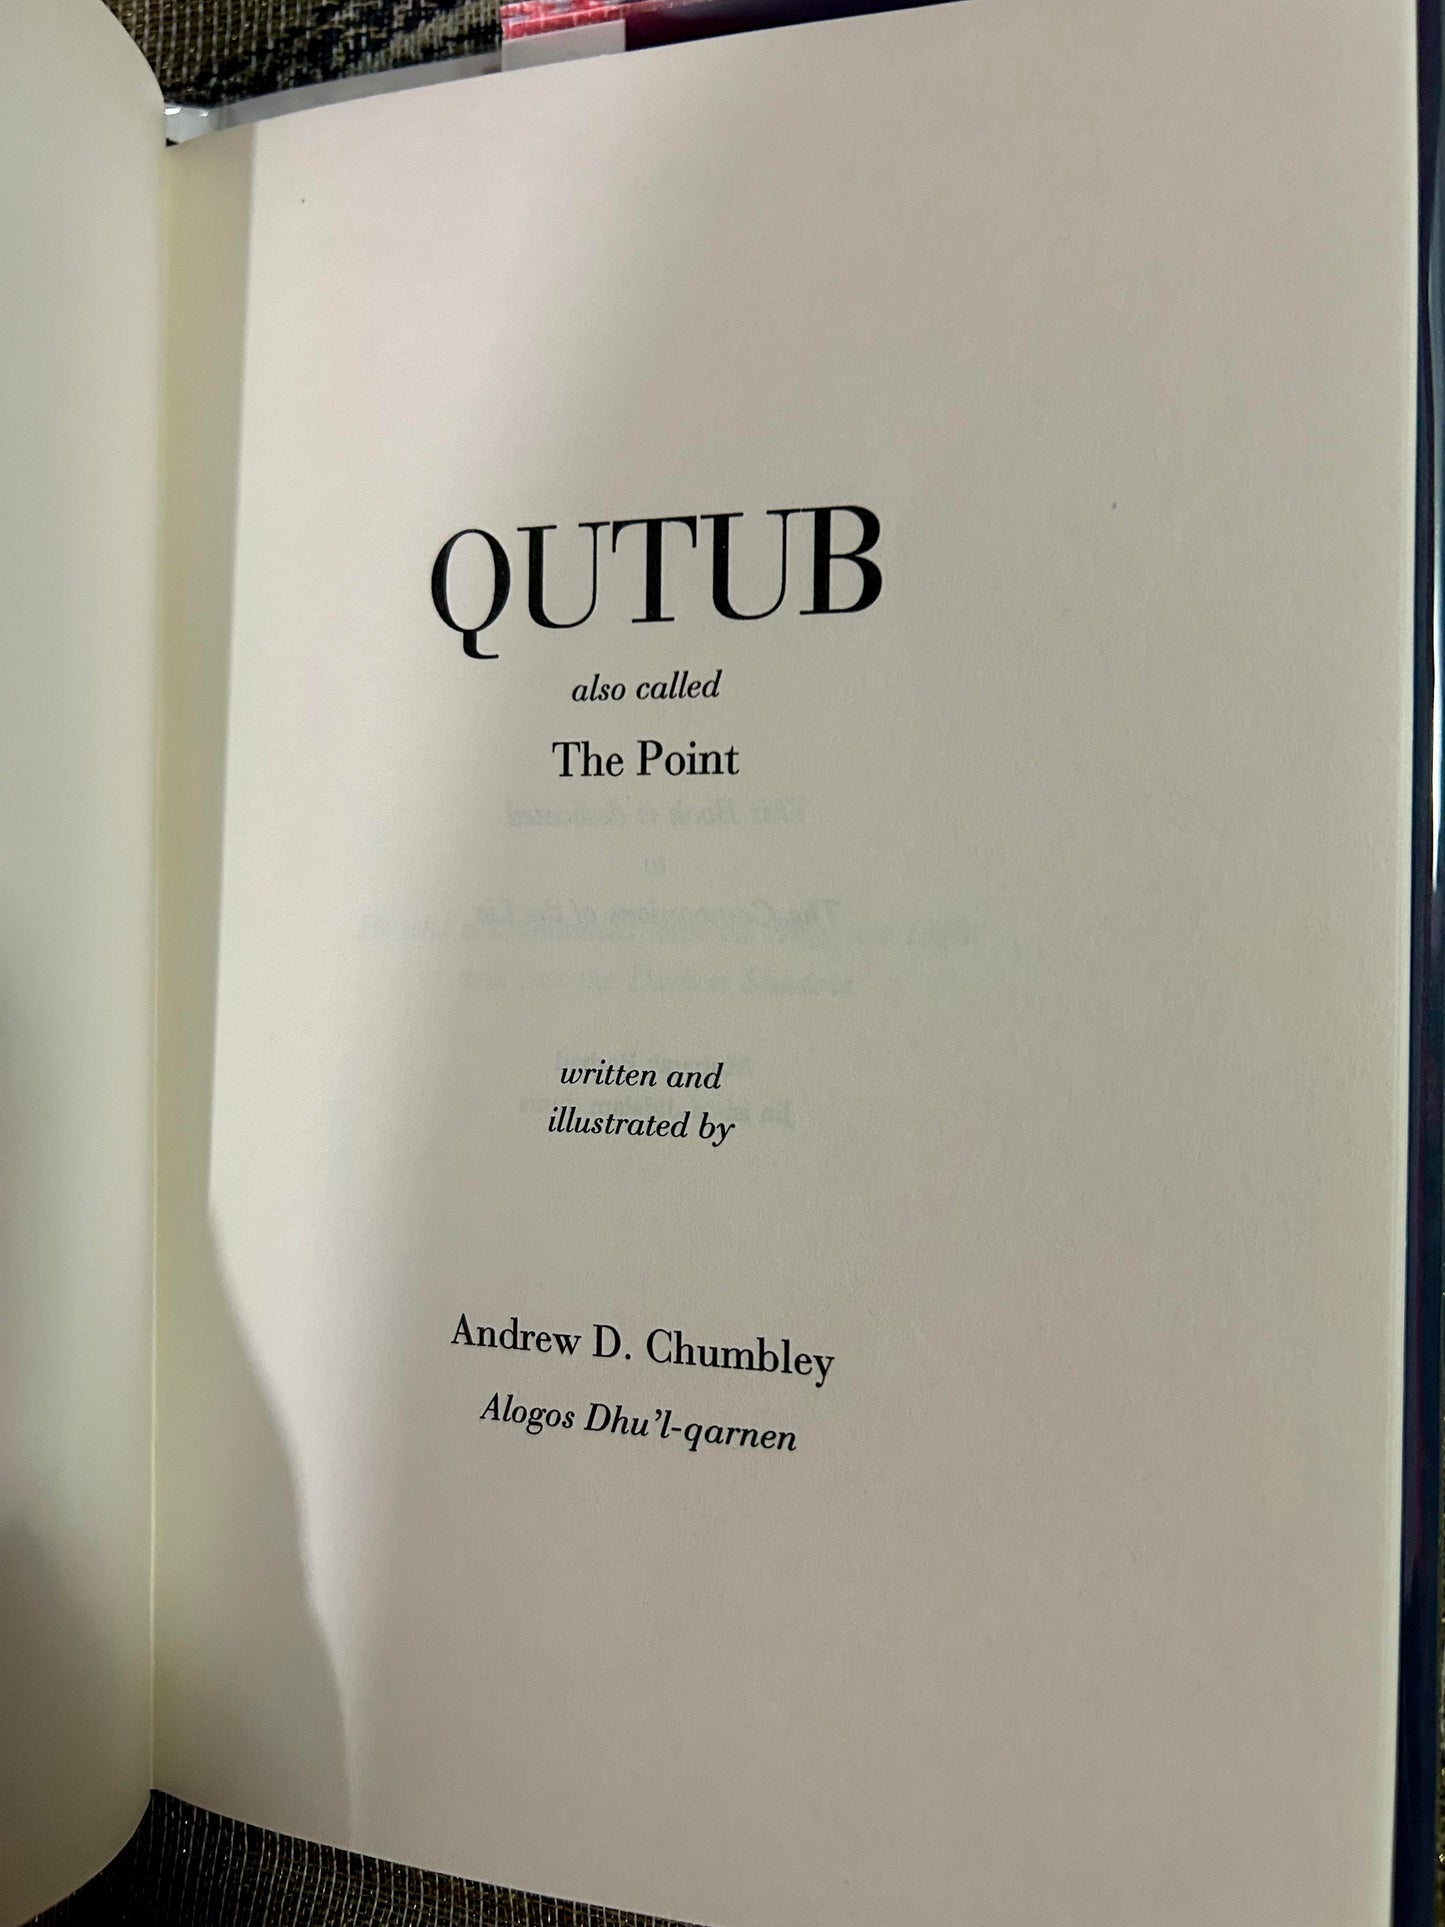 Qutub also called The Point By Andrew D. Chumbley Hardcover 1995